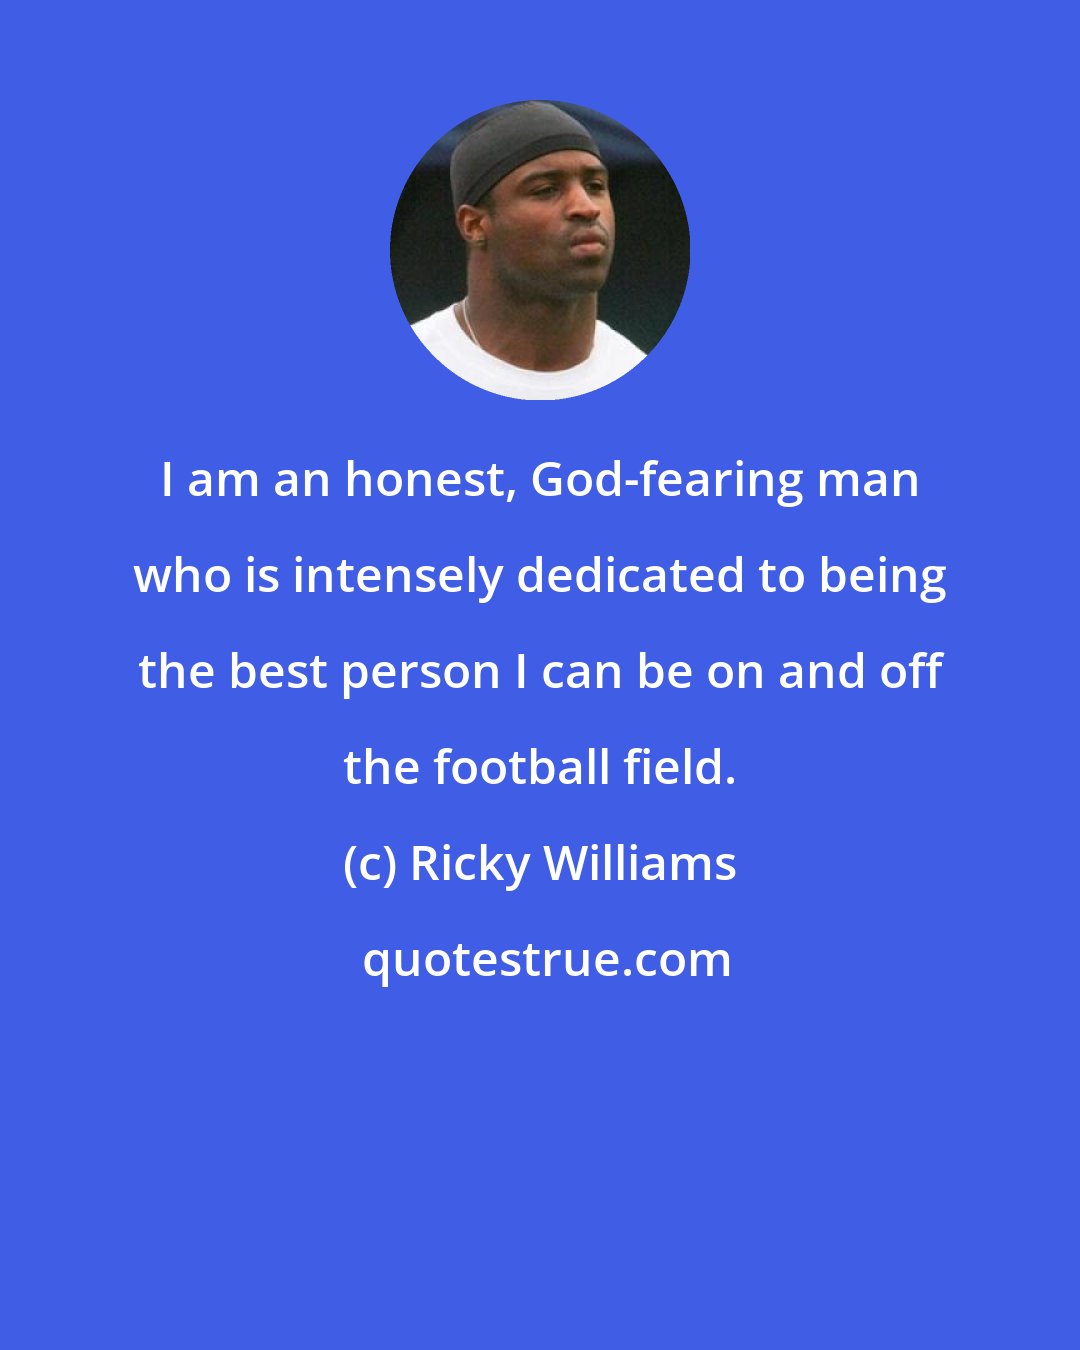 Ricky Williams: I am an honest, God-fearing man who is intensely dedicated to being the best person I can be on and off the football field.